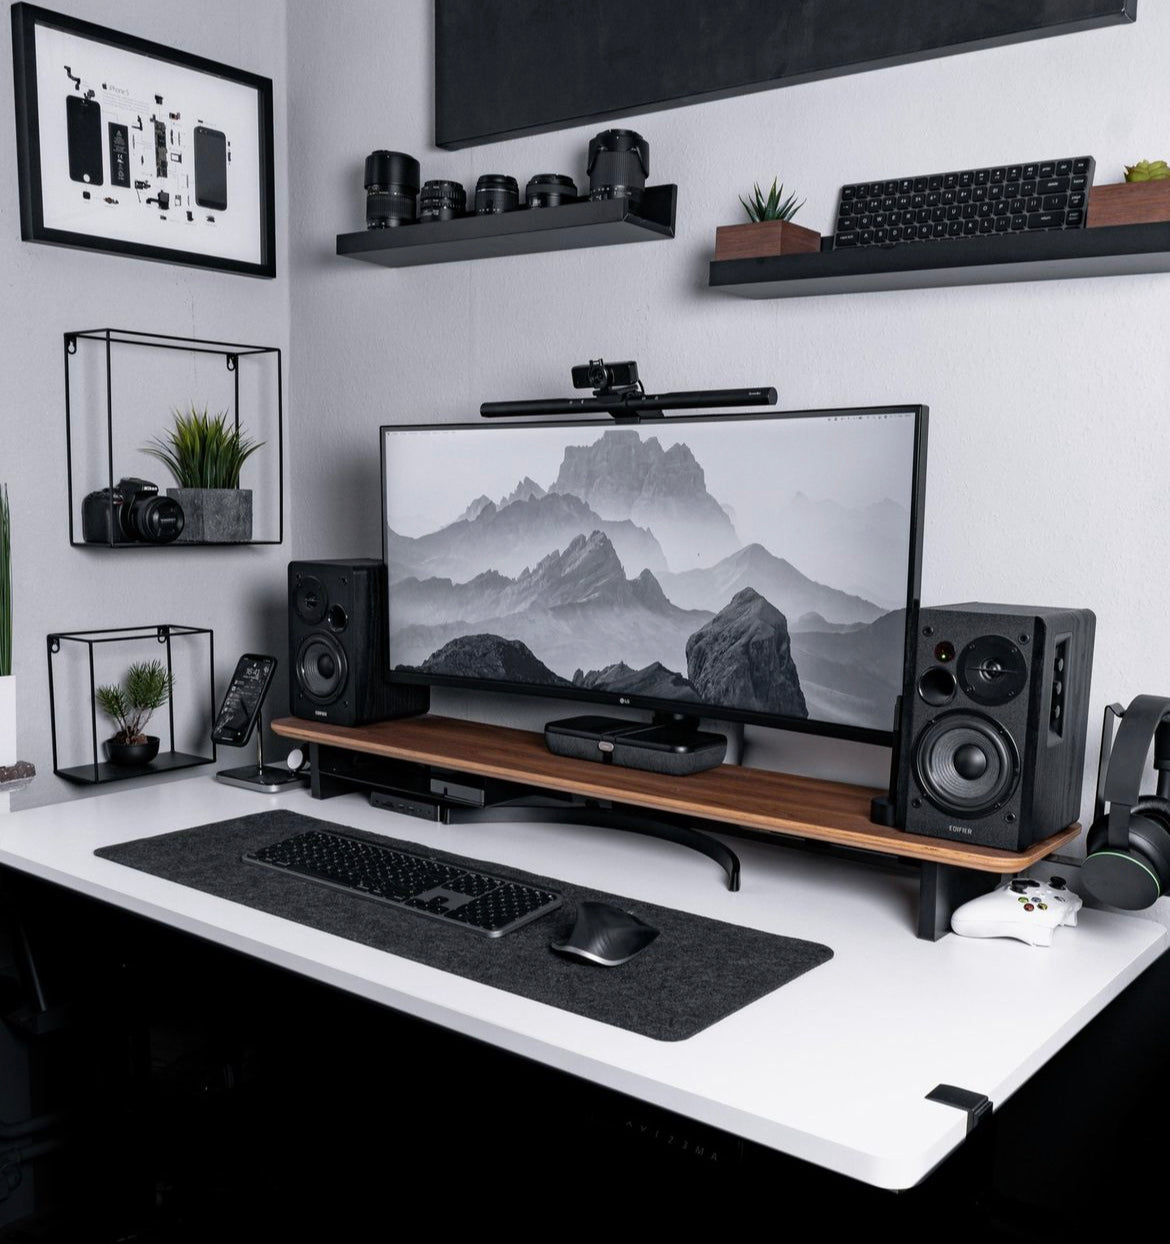 Create a Workspace You Adore on a Limited Budget